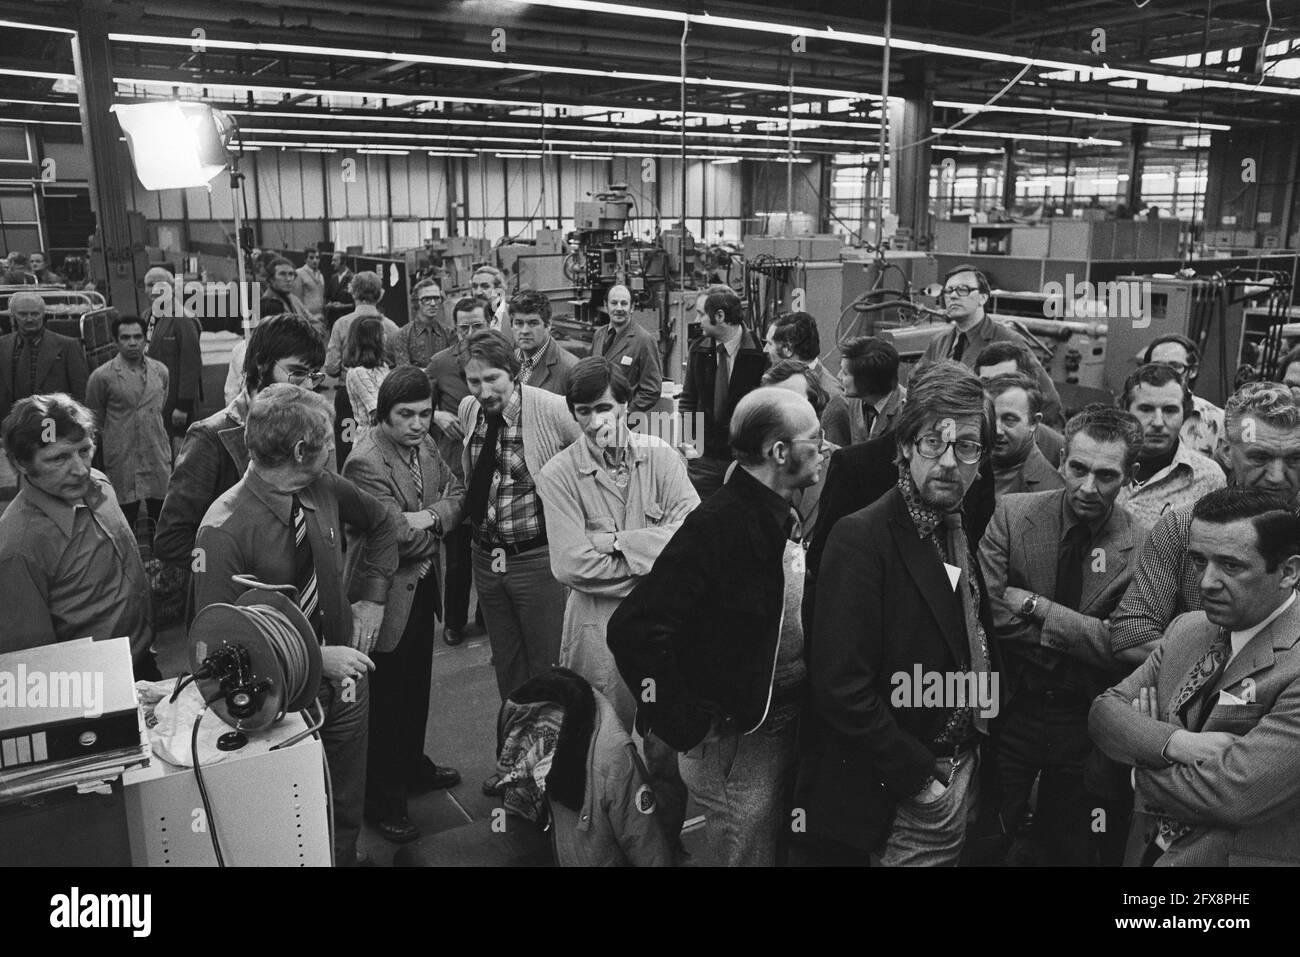 Occupation of Tealtronic; workers during meeting in factory hall, January 10, 1977, CONTENT, WORKERS, meetings, The Netherlands, 20th century press agency photo, news to remember, documentary, historic photography 1945-1990, visual stories, human history of the Twentieth Century, capturing moments in time Stock Photo